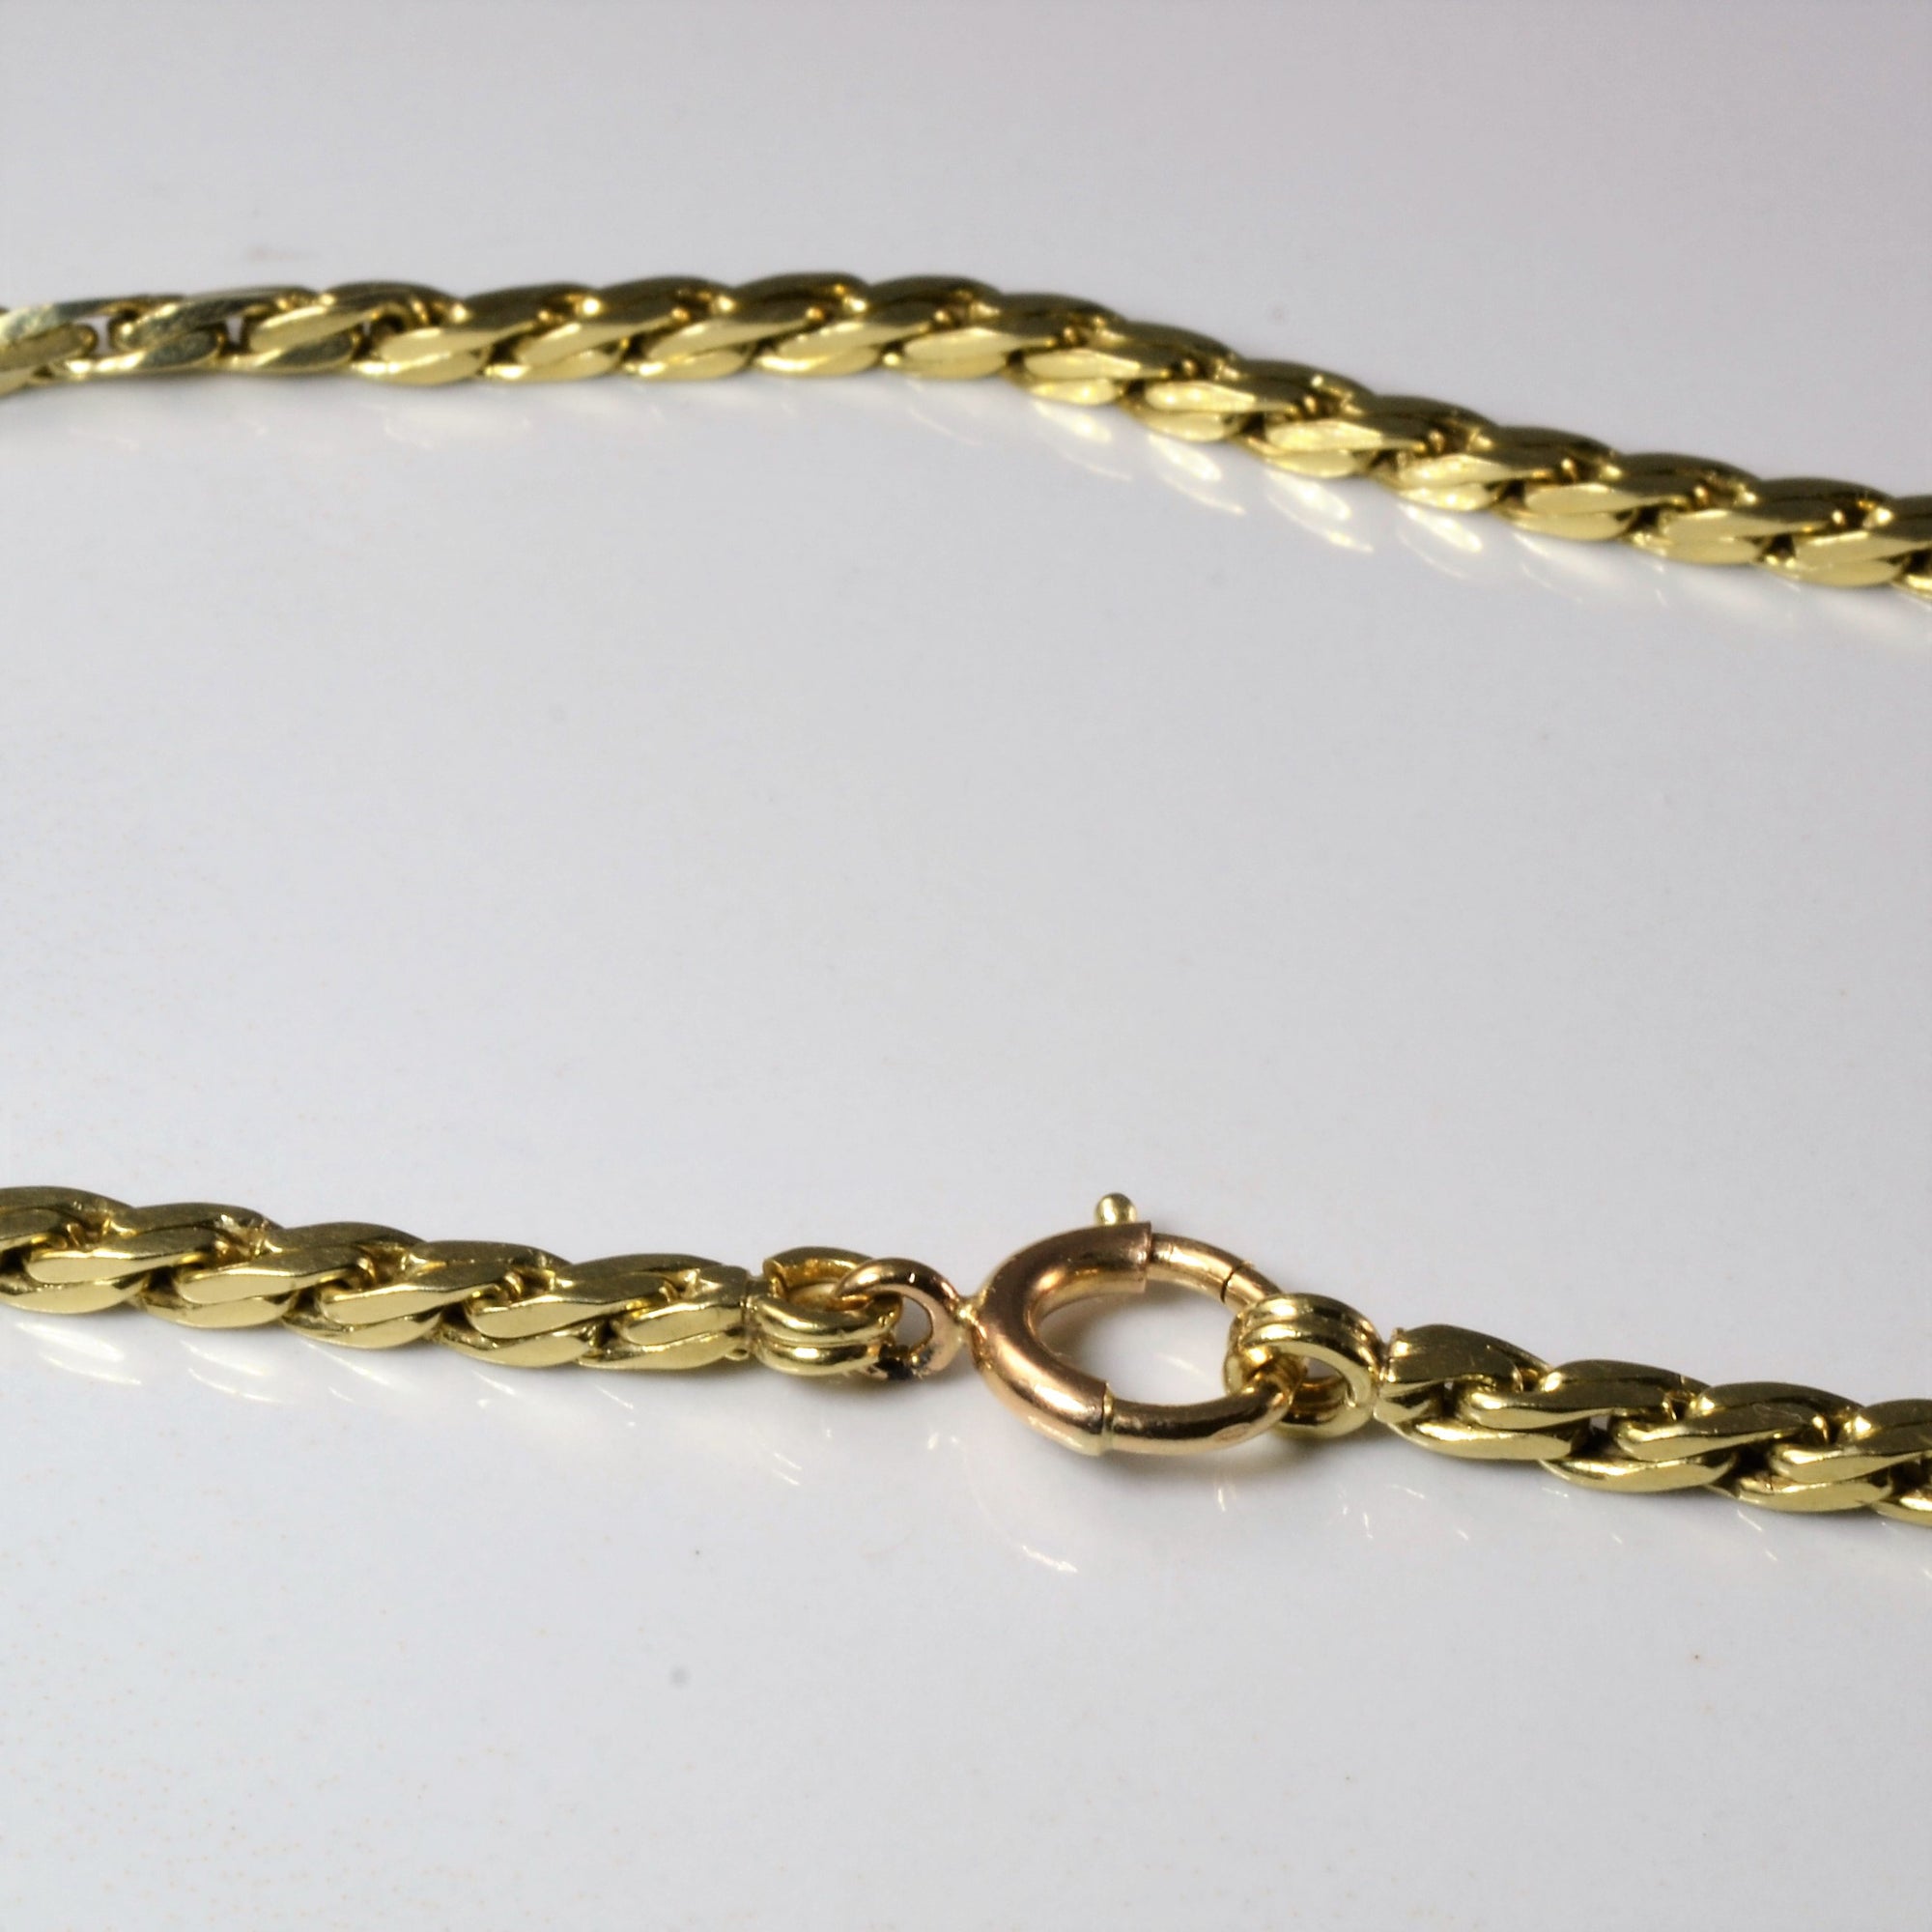 10k Yellow Gold Elongated Curb Chain | 14